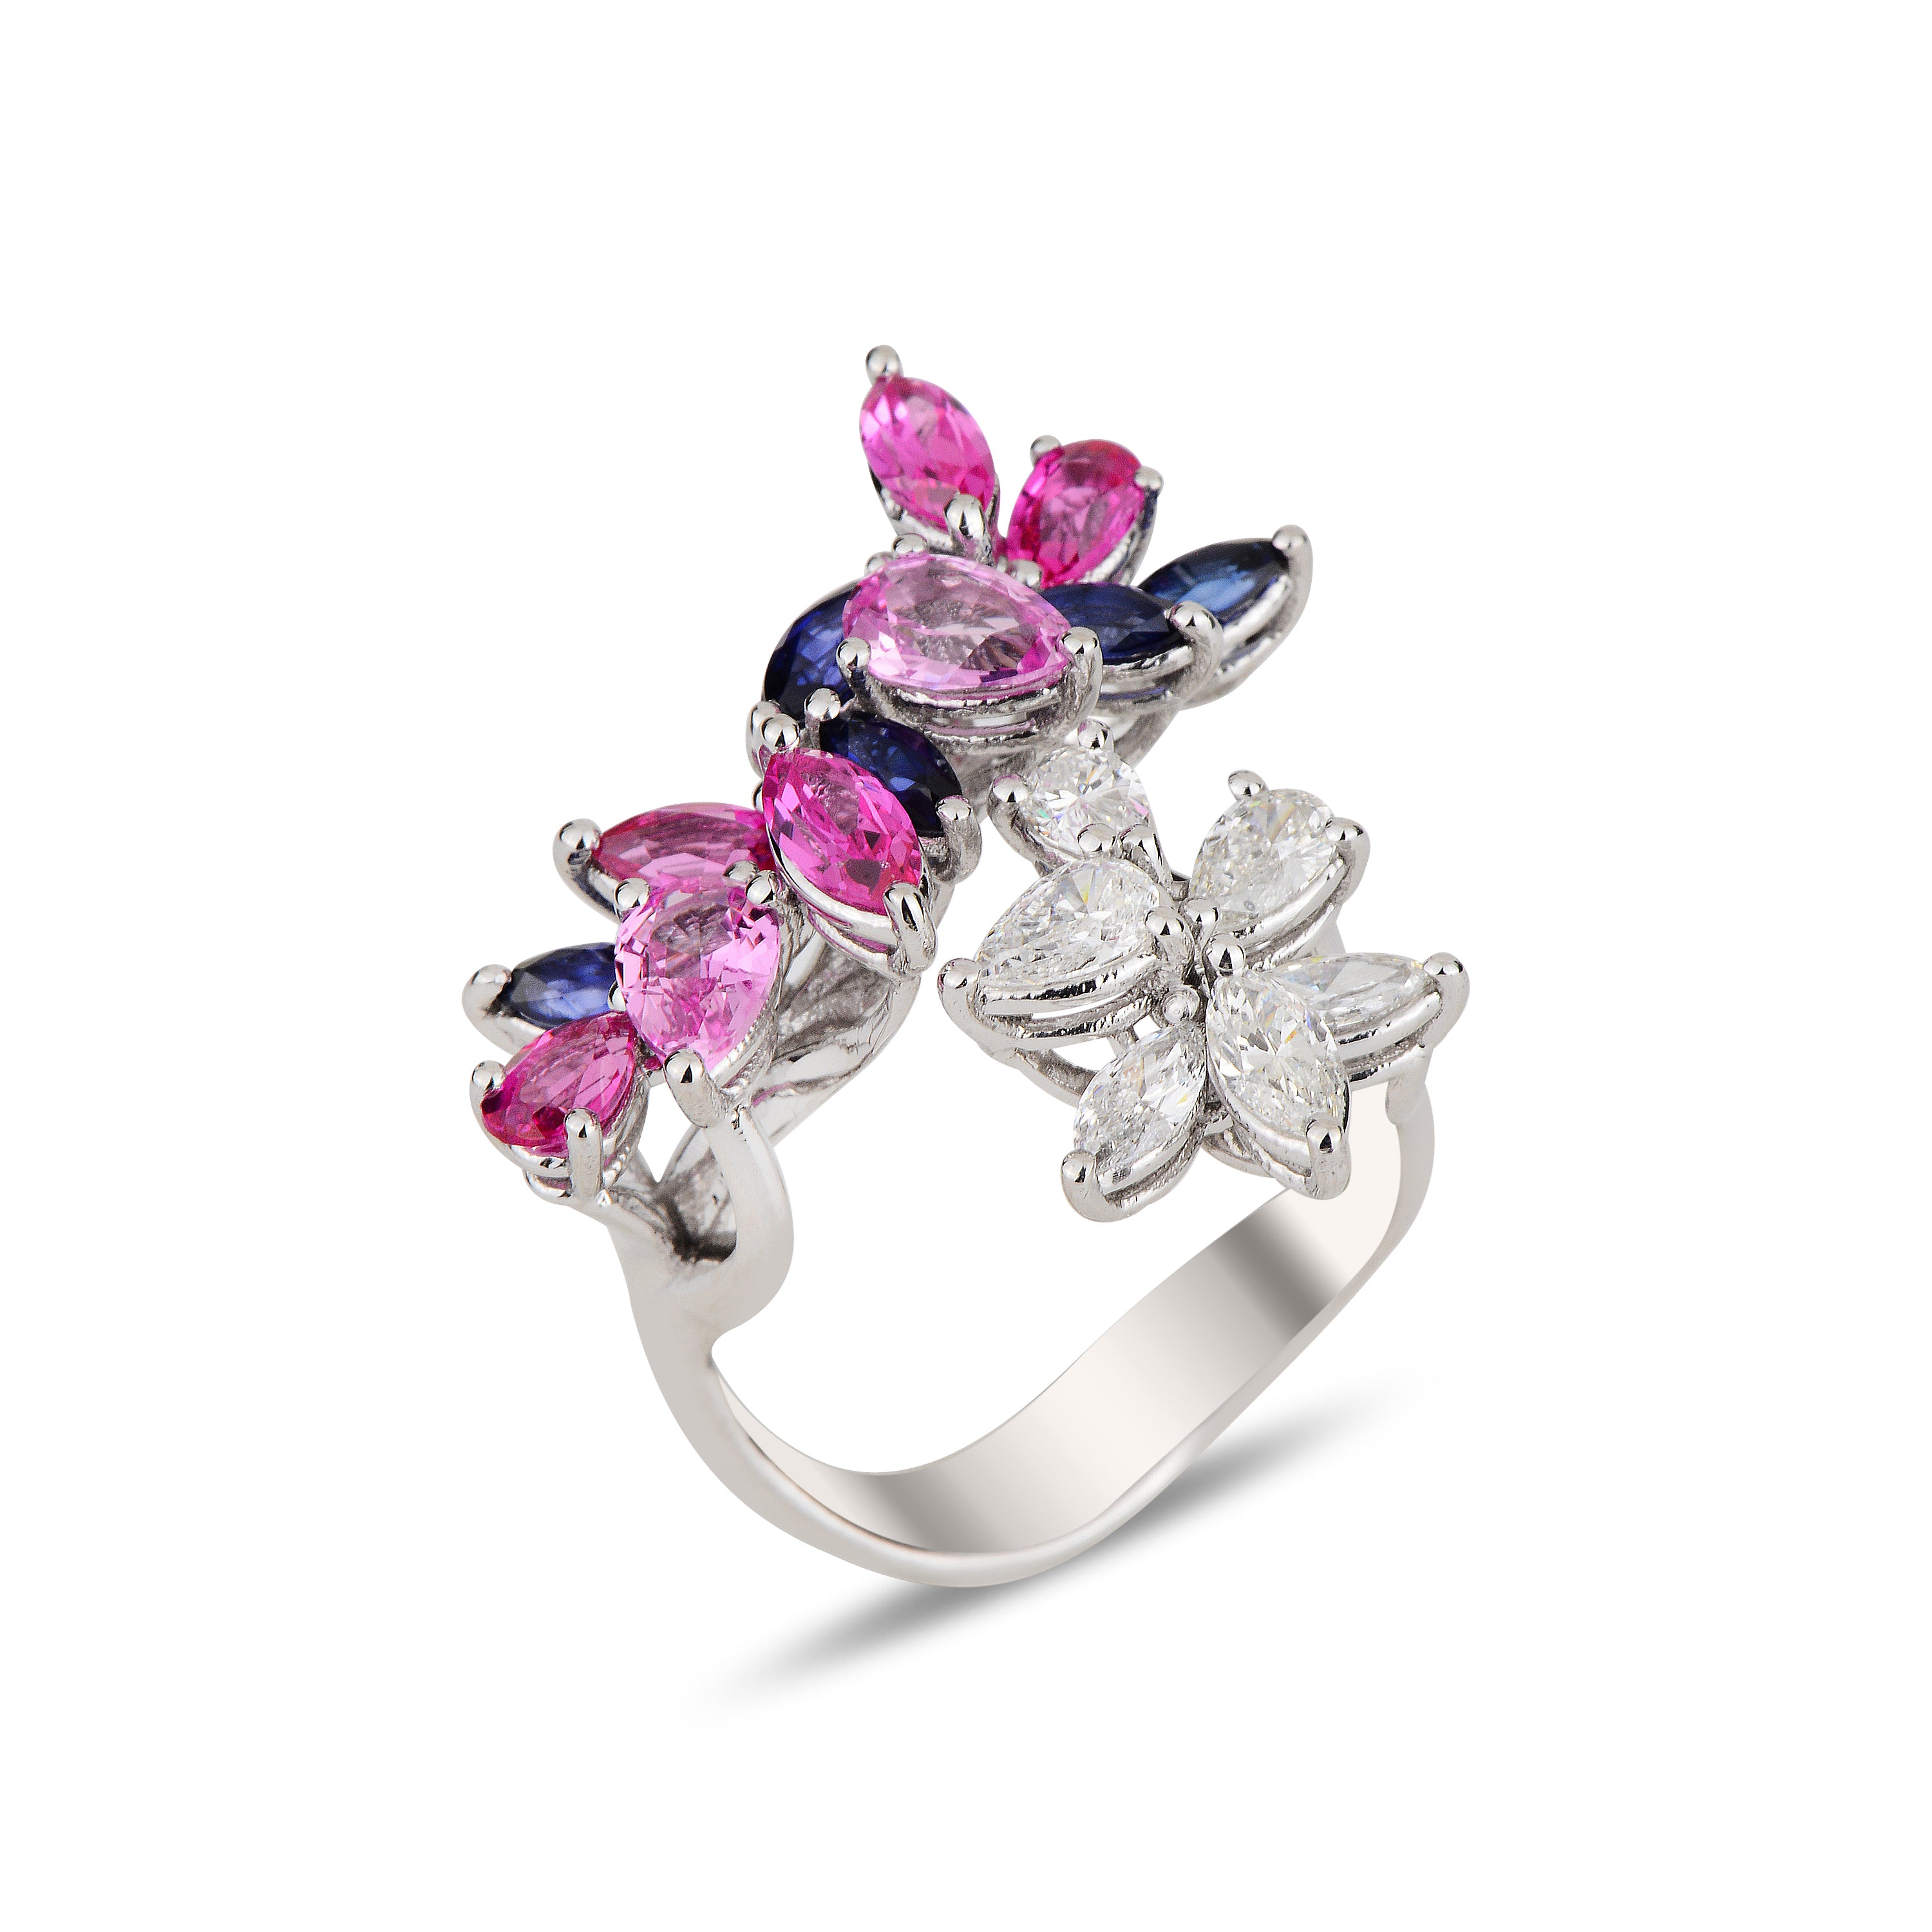 Maki White Ring with Blue and Pink Sapphire